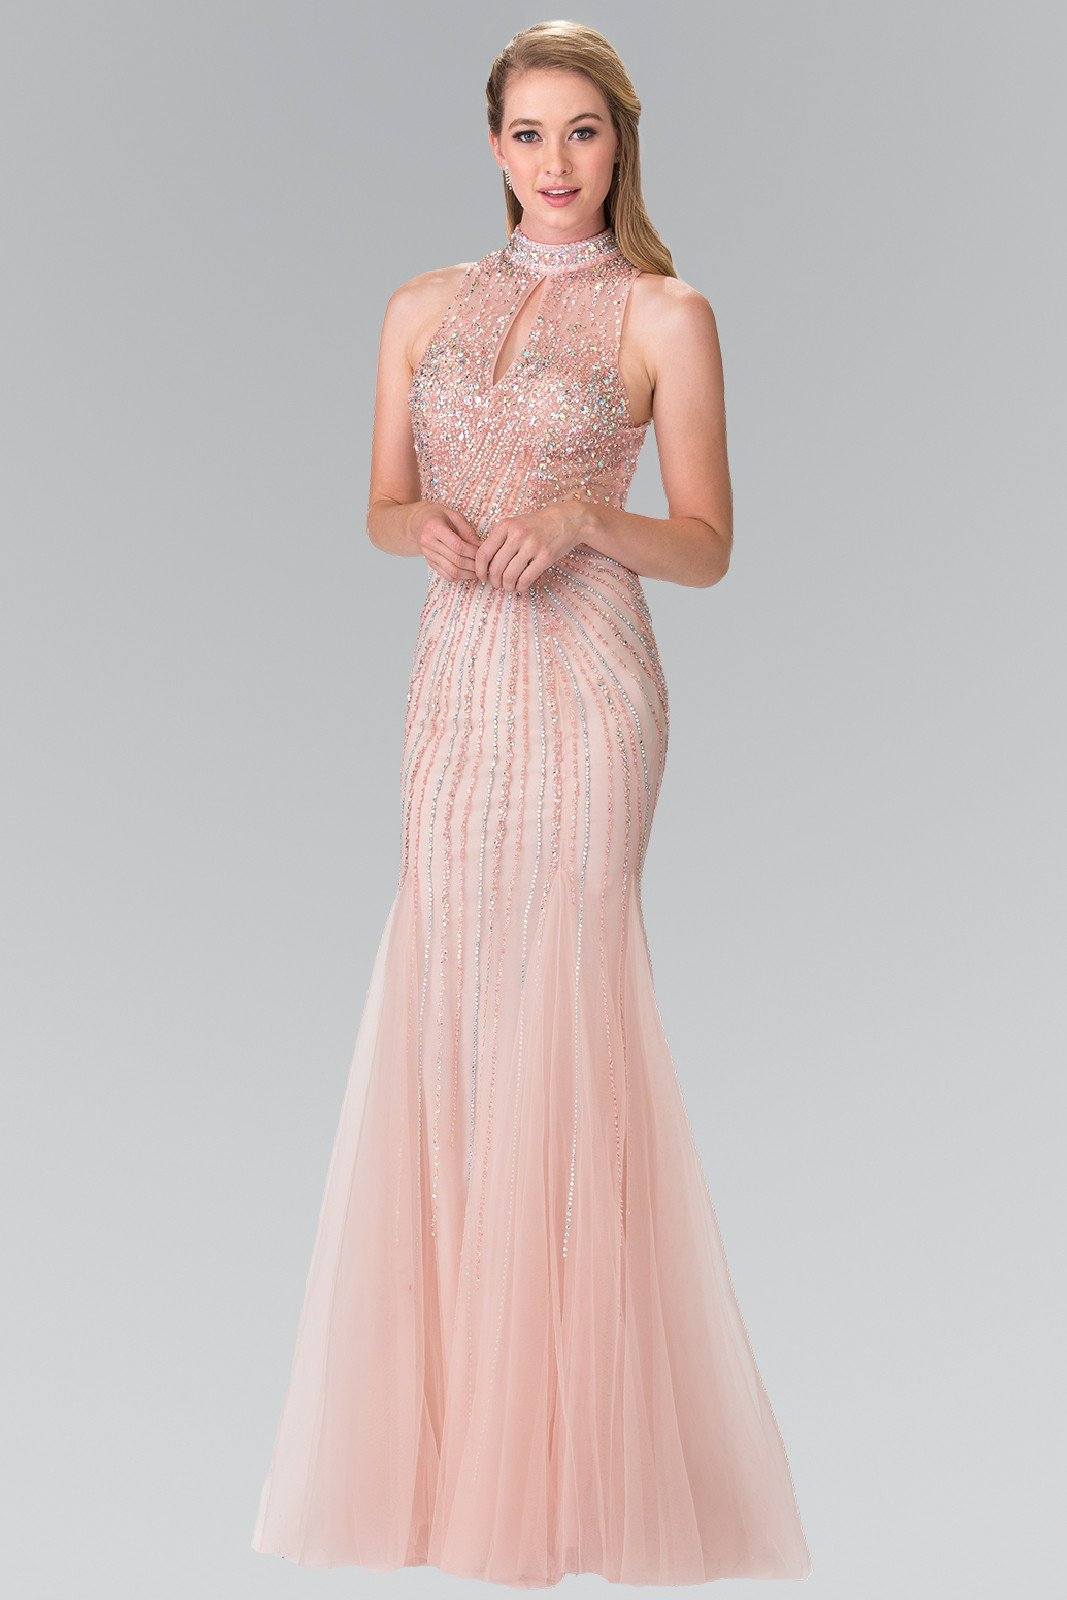 Long Halter Dress with Beaded Illusion Top by Elizabeth K GL2330-Long Formal Dresses-ABC Fashion